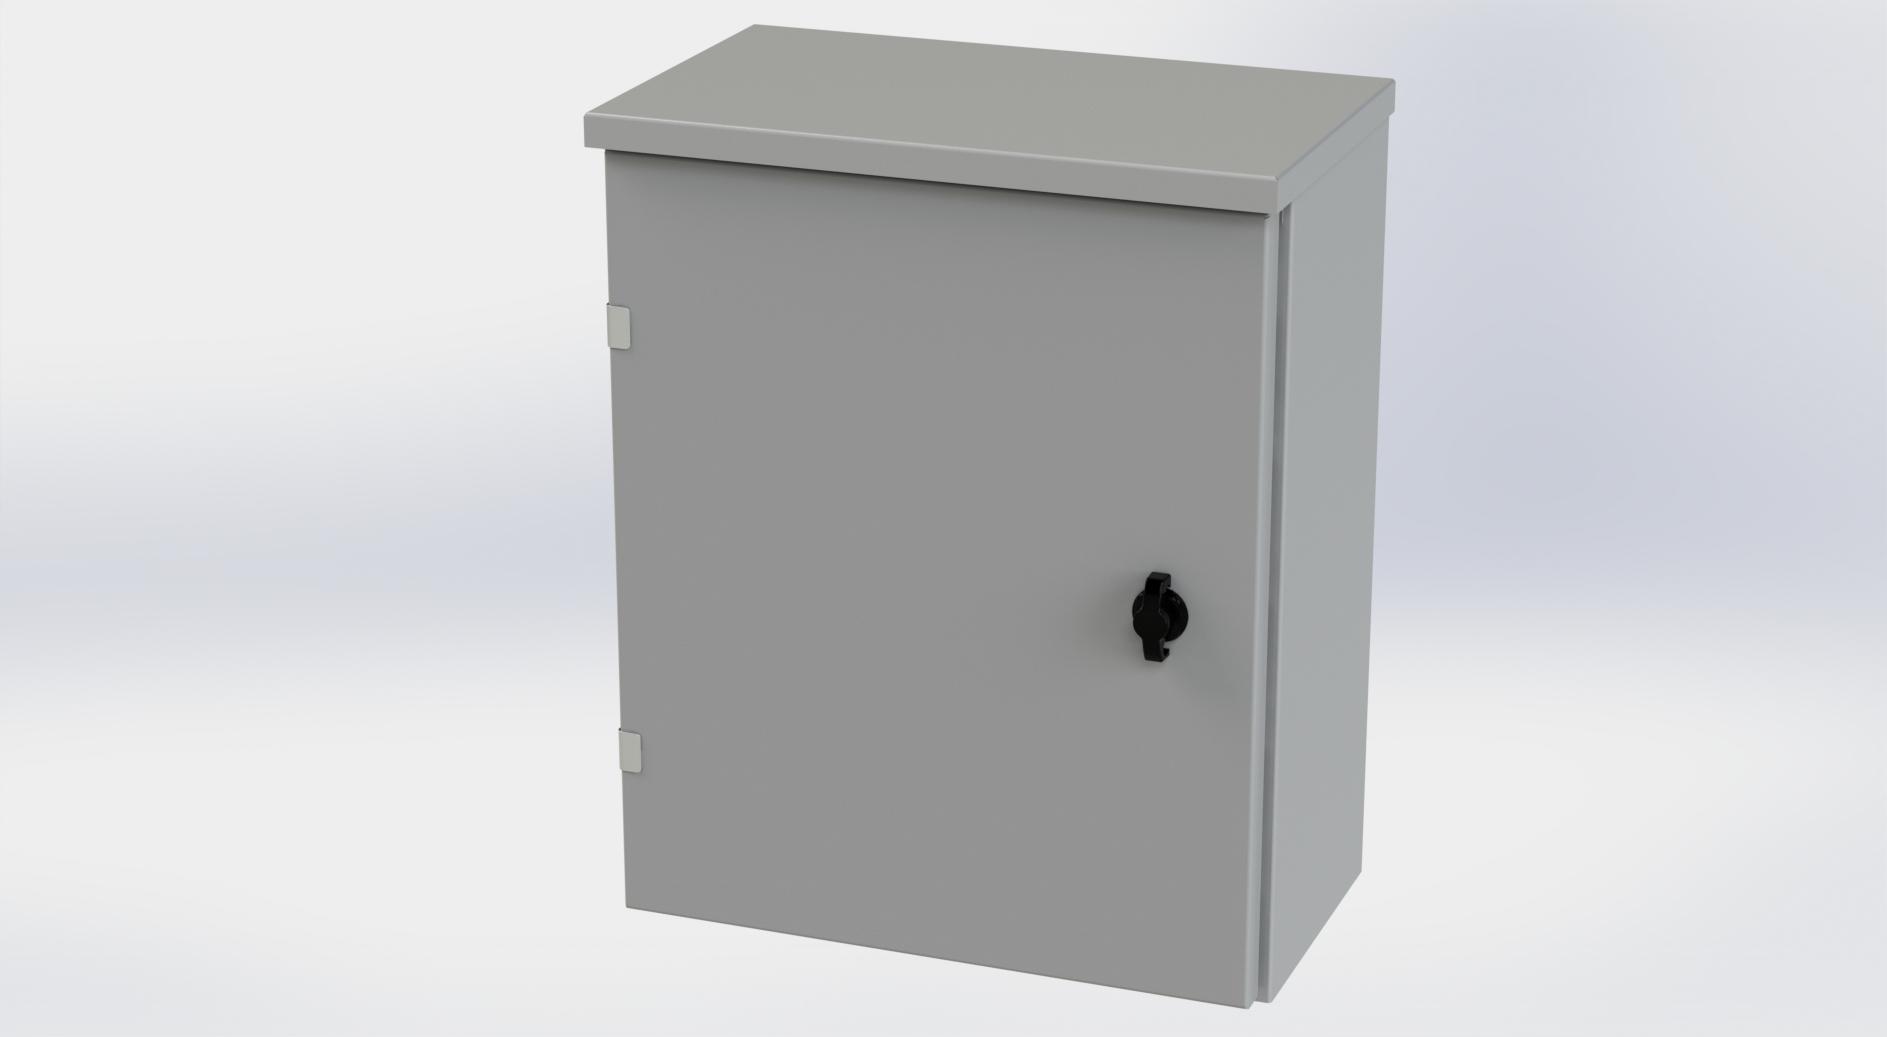 Saginaw Control SCE-20R1608LP Type-3R Hinged Cover Enclosure, Height:20.00", Width:16.00", Depth:8.00", ANSI-61 gray powder coating inside and out. Optional sub-panels are powder coated white.